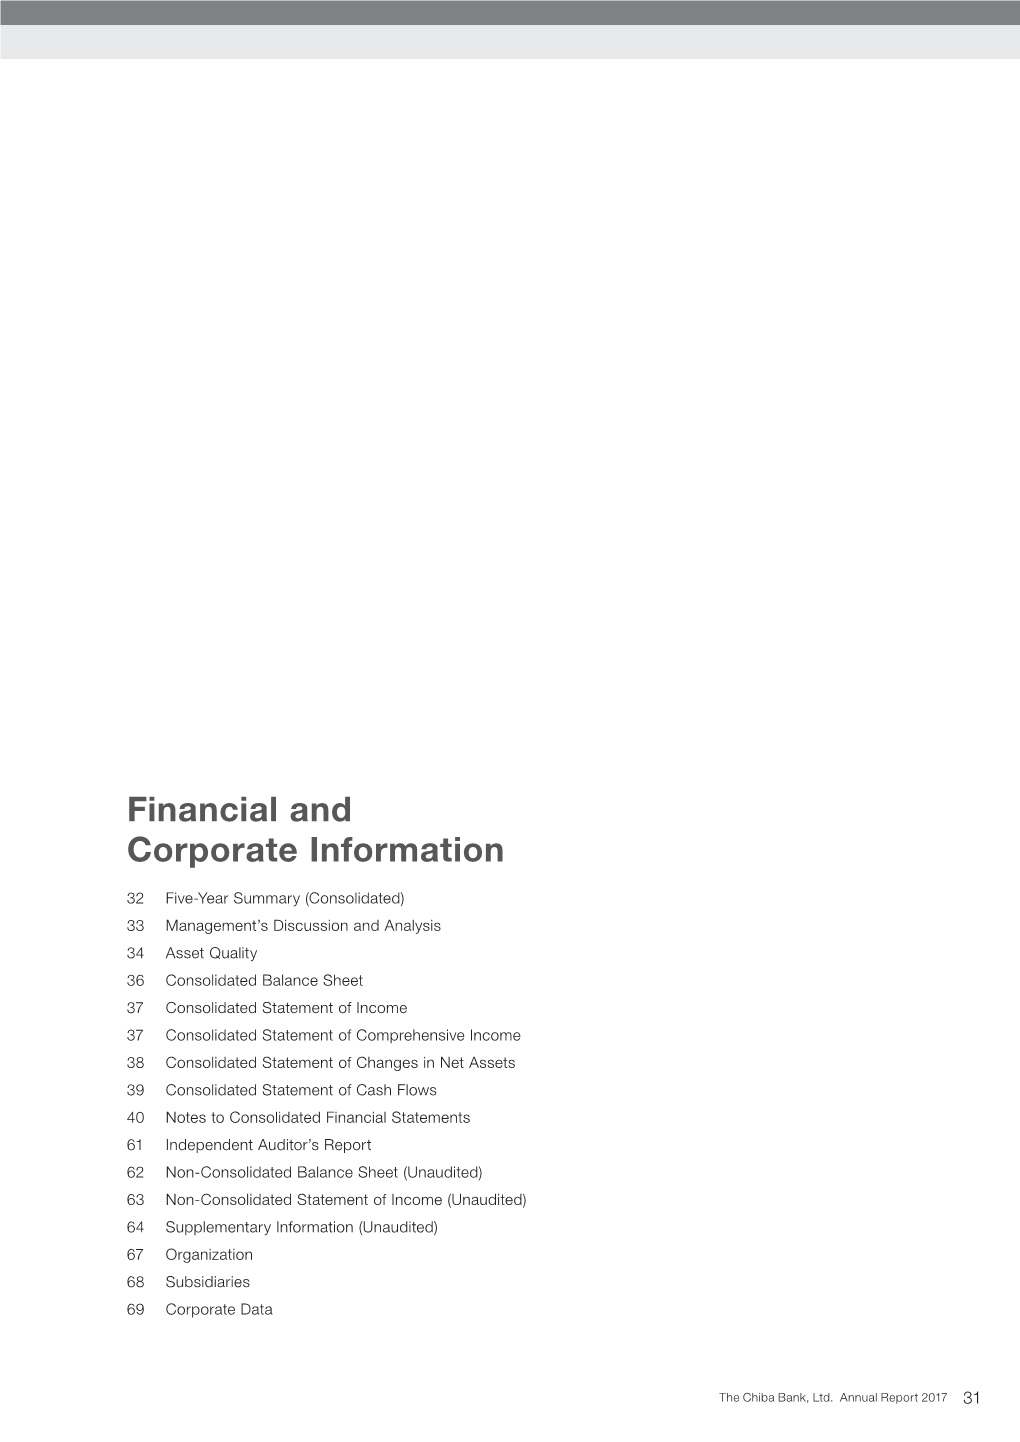 Financial and Corporate Information